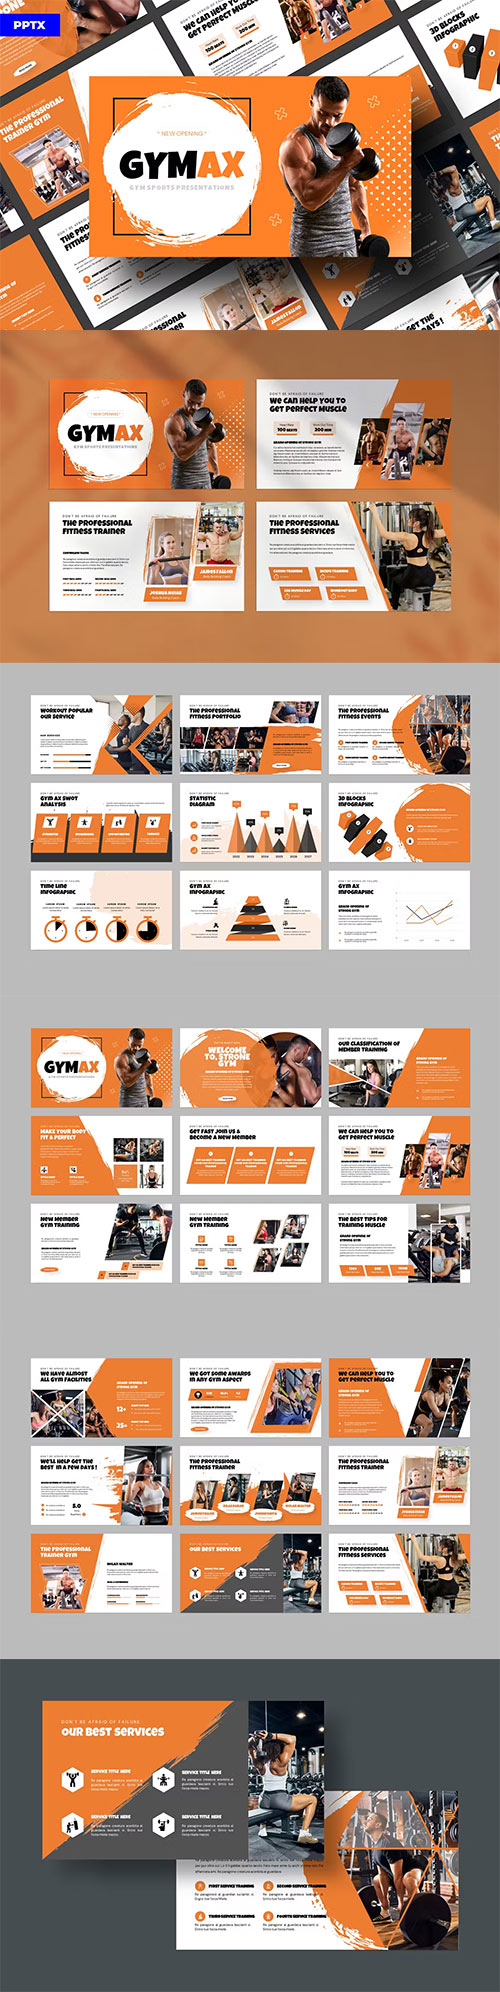 Gym & Fitness PowerPoint Template BWE9RFA